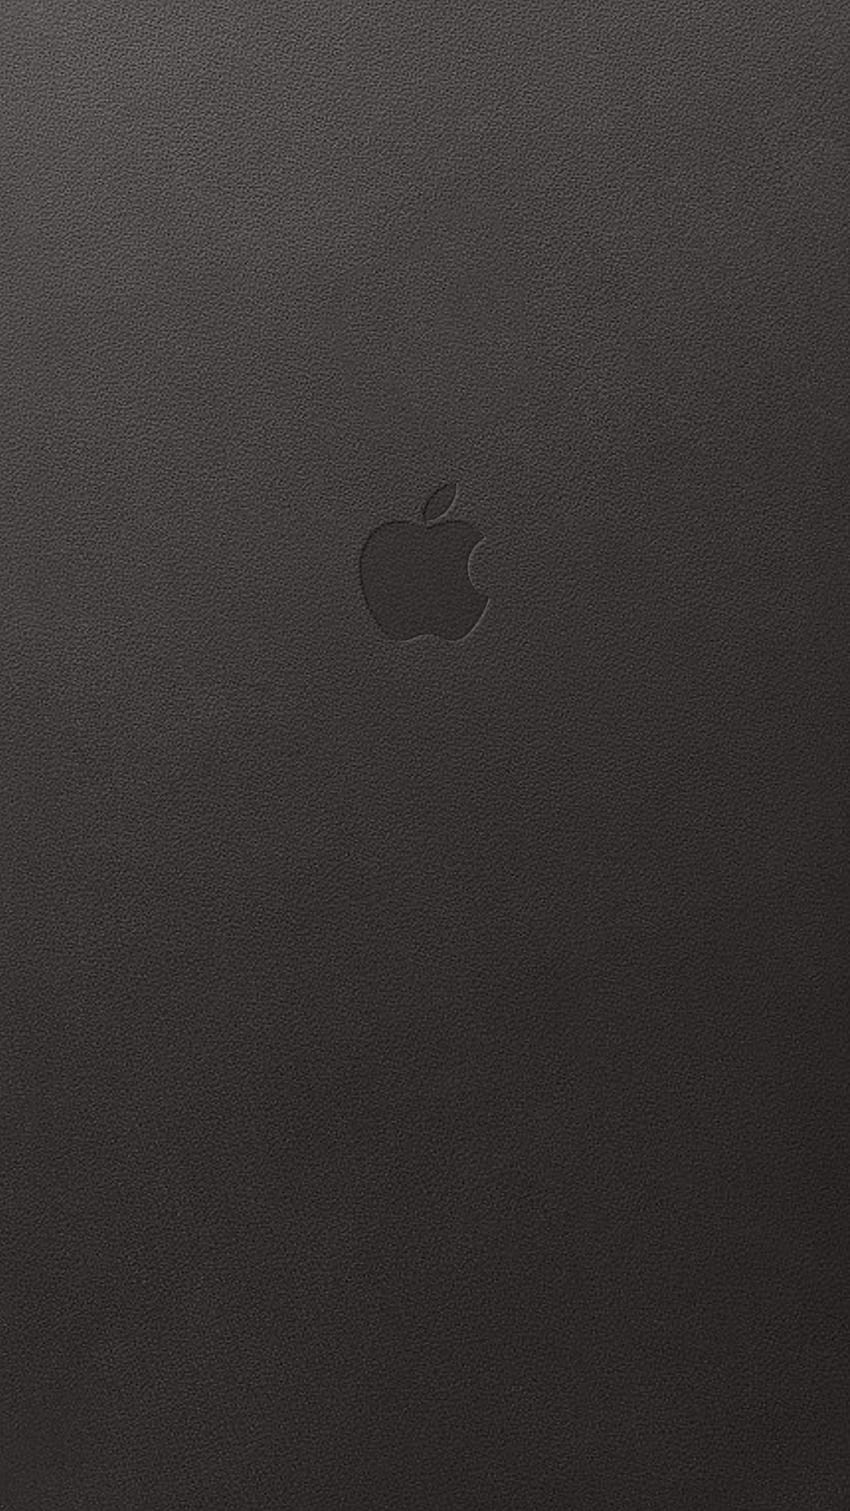 These will match your Apple leather case, Gray Leather HD phone wallpaper